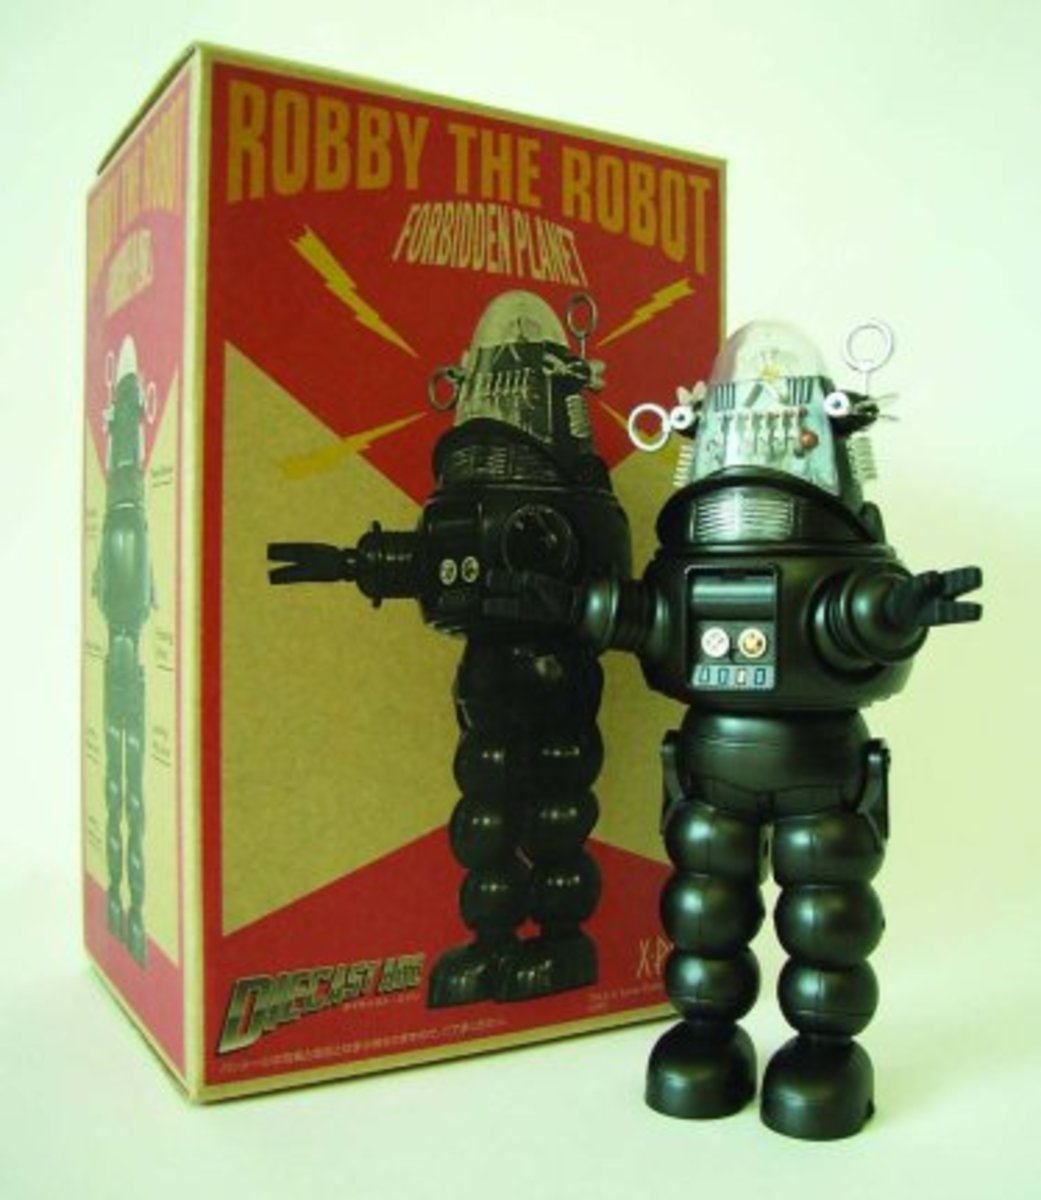 Robbie the Robot from "Forbidden Planet"